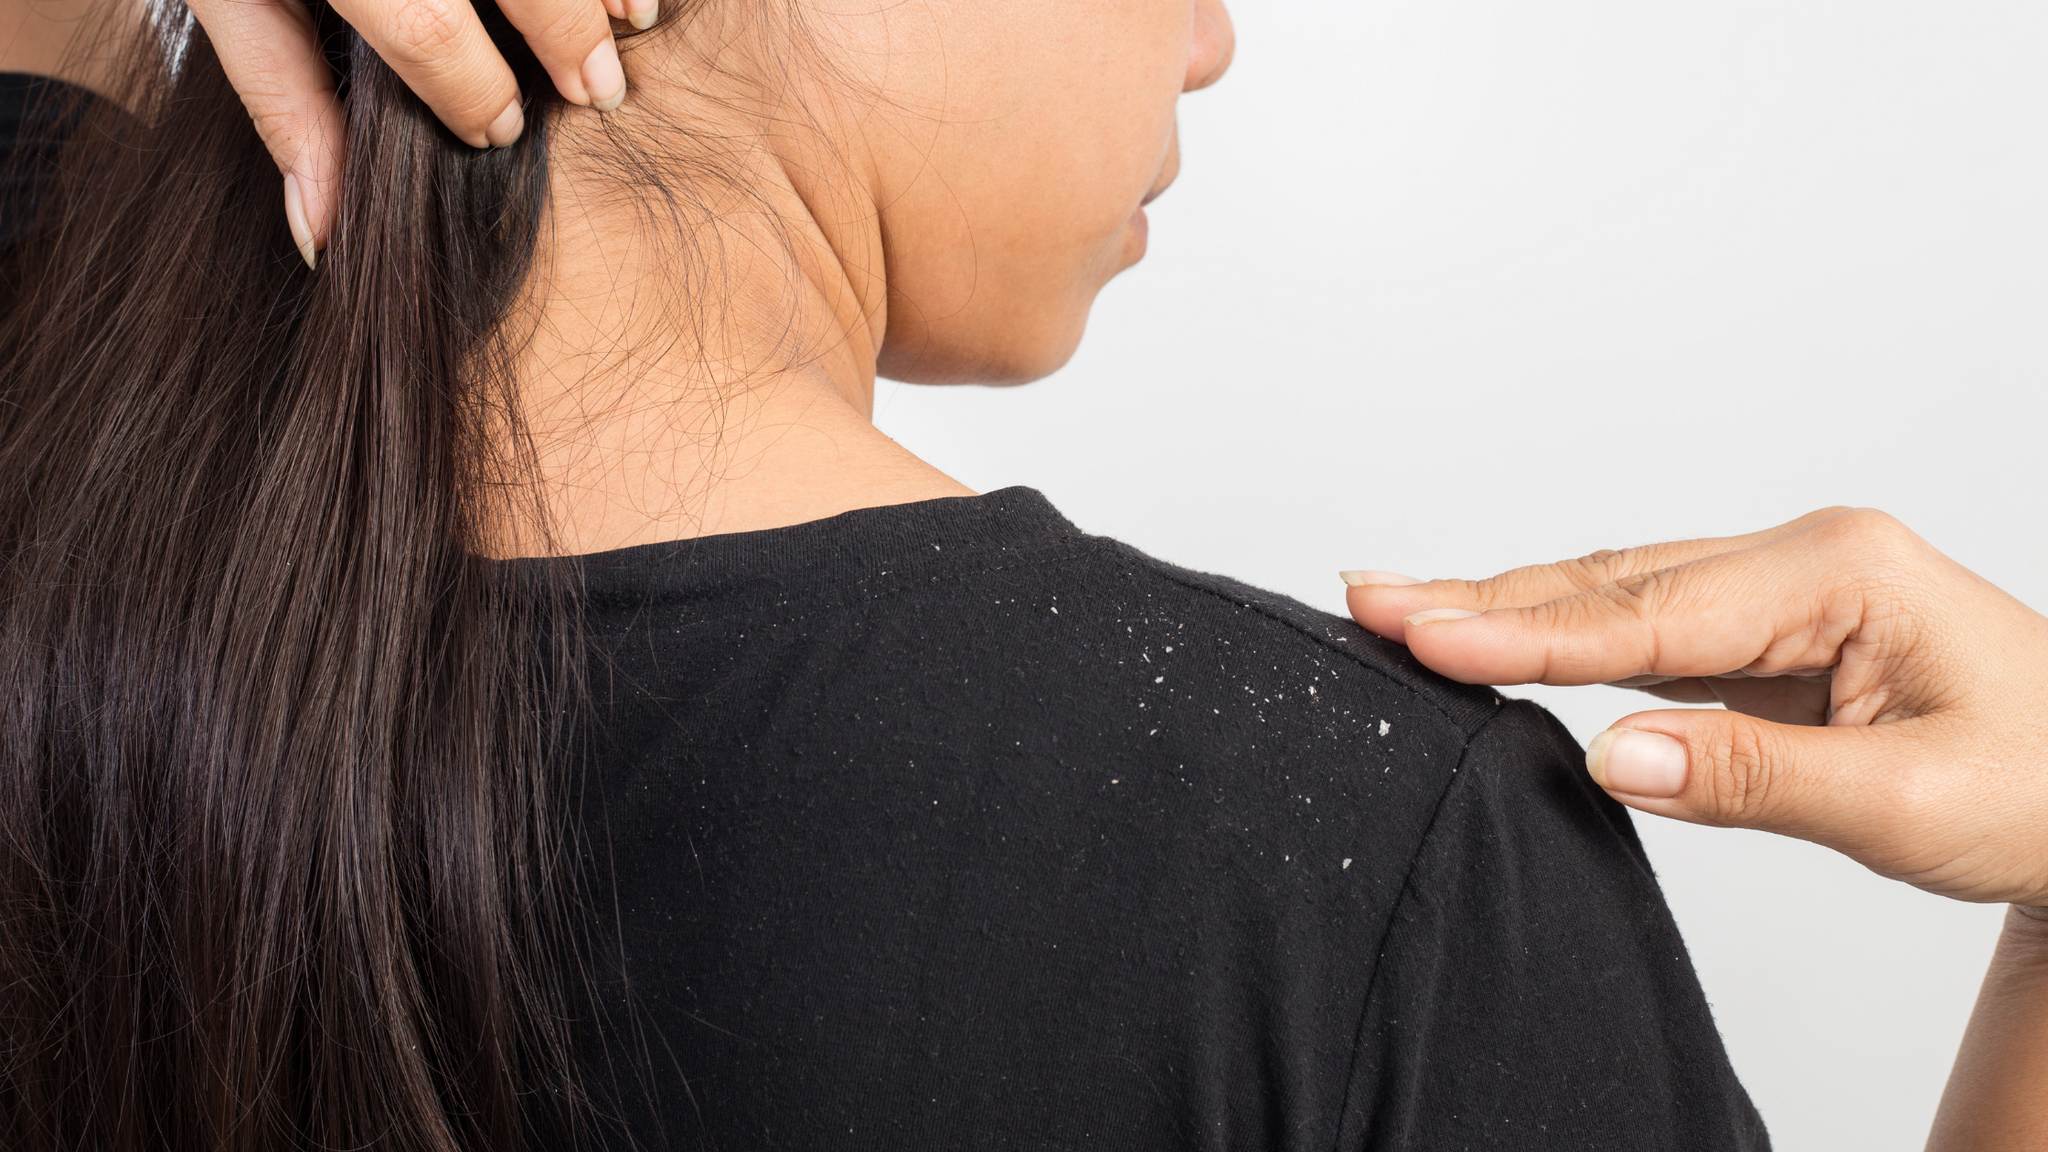 Here’s How You Can Prevent Your Scalp From Itchy White or Yellow Flakes